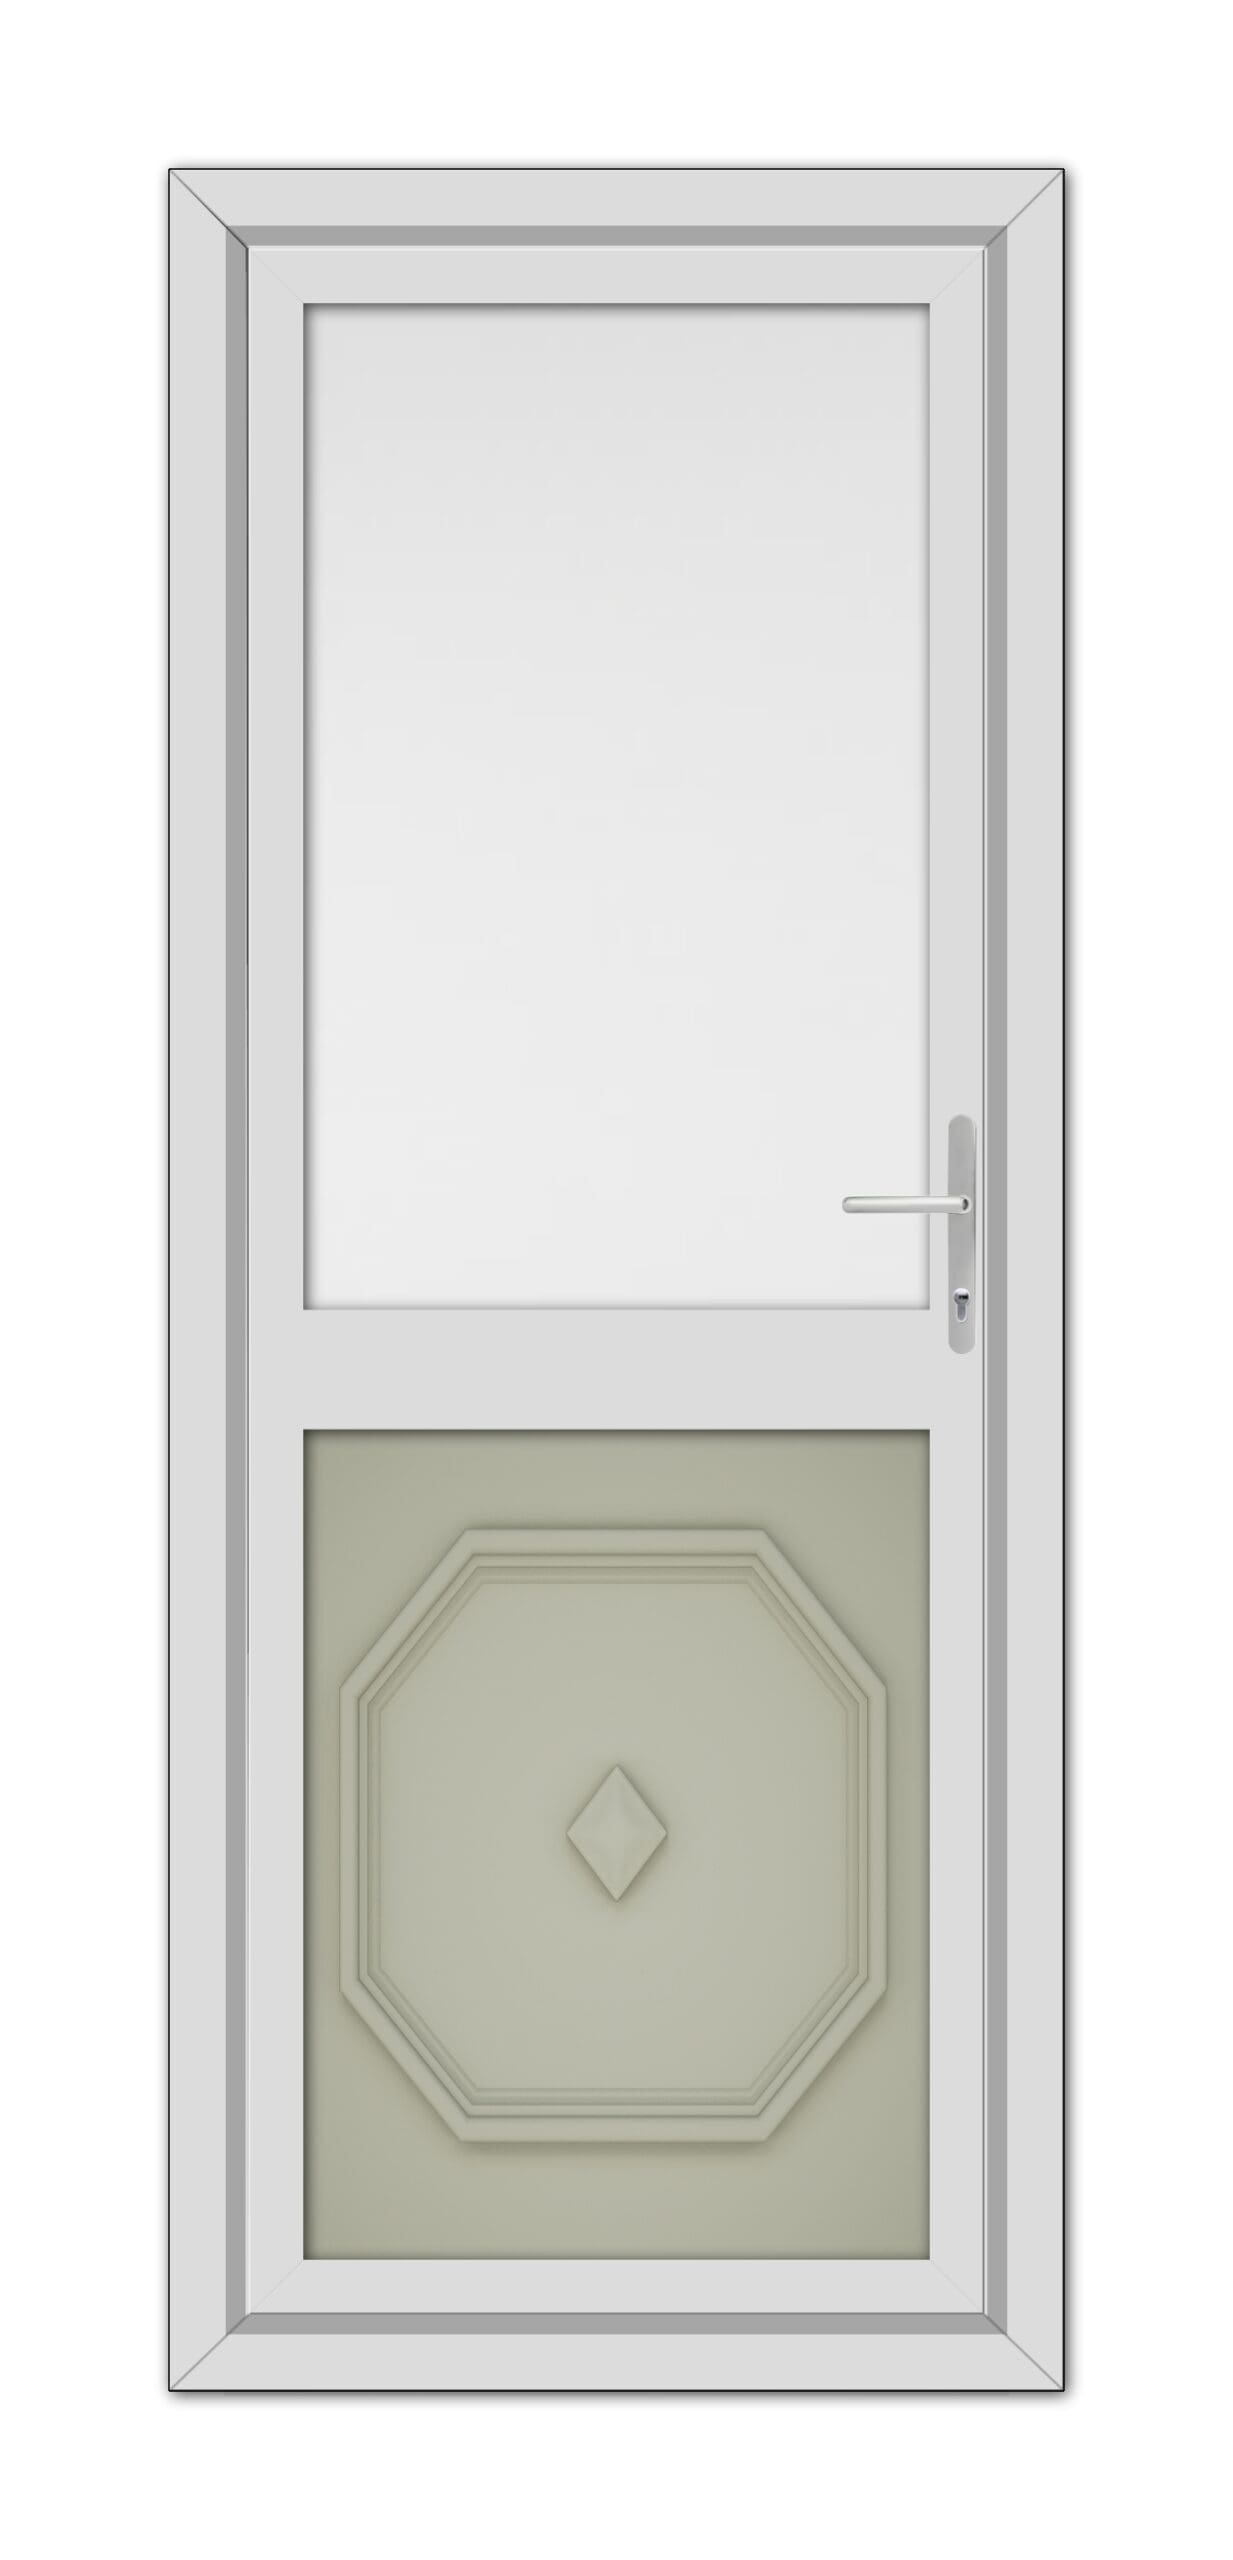 A modern Agate Grey Westminster Half uPVC Back Door with a geometric panel design at the bottom and a small square window at the top, set within a simple frame.